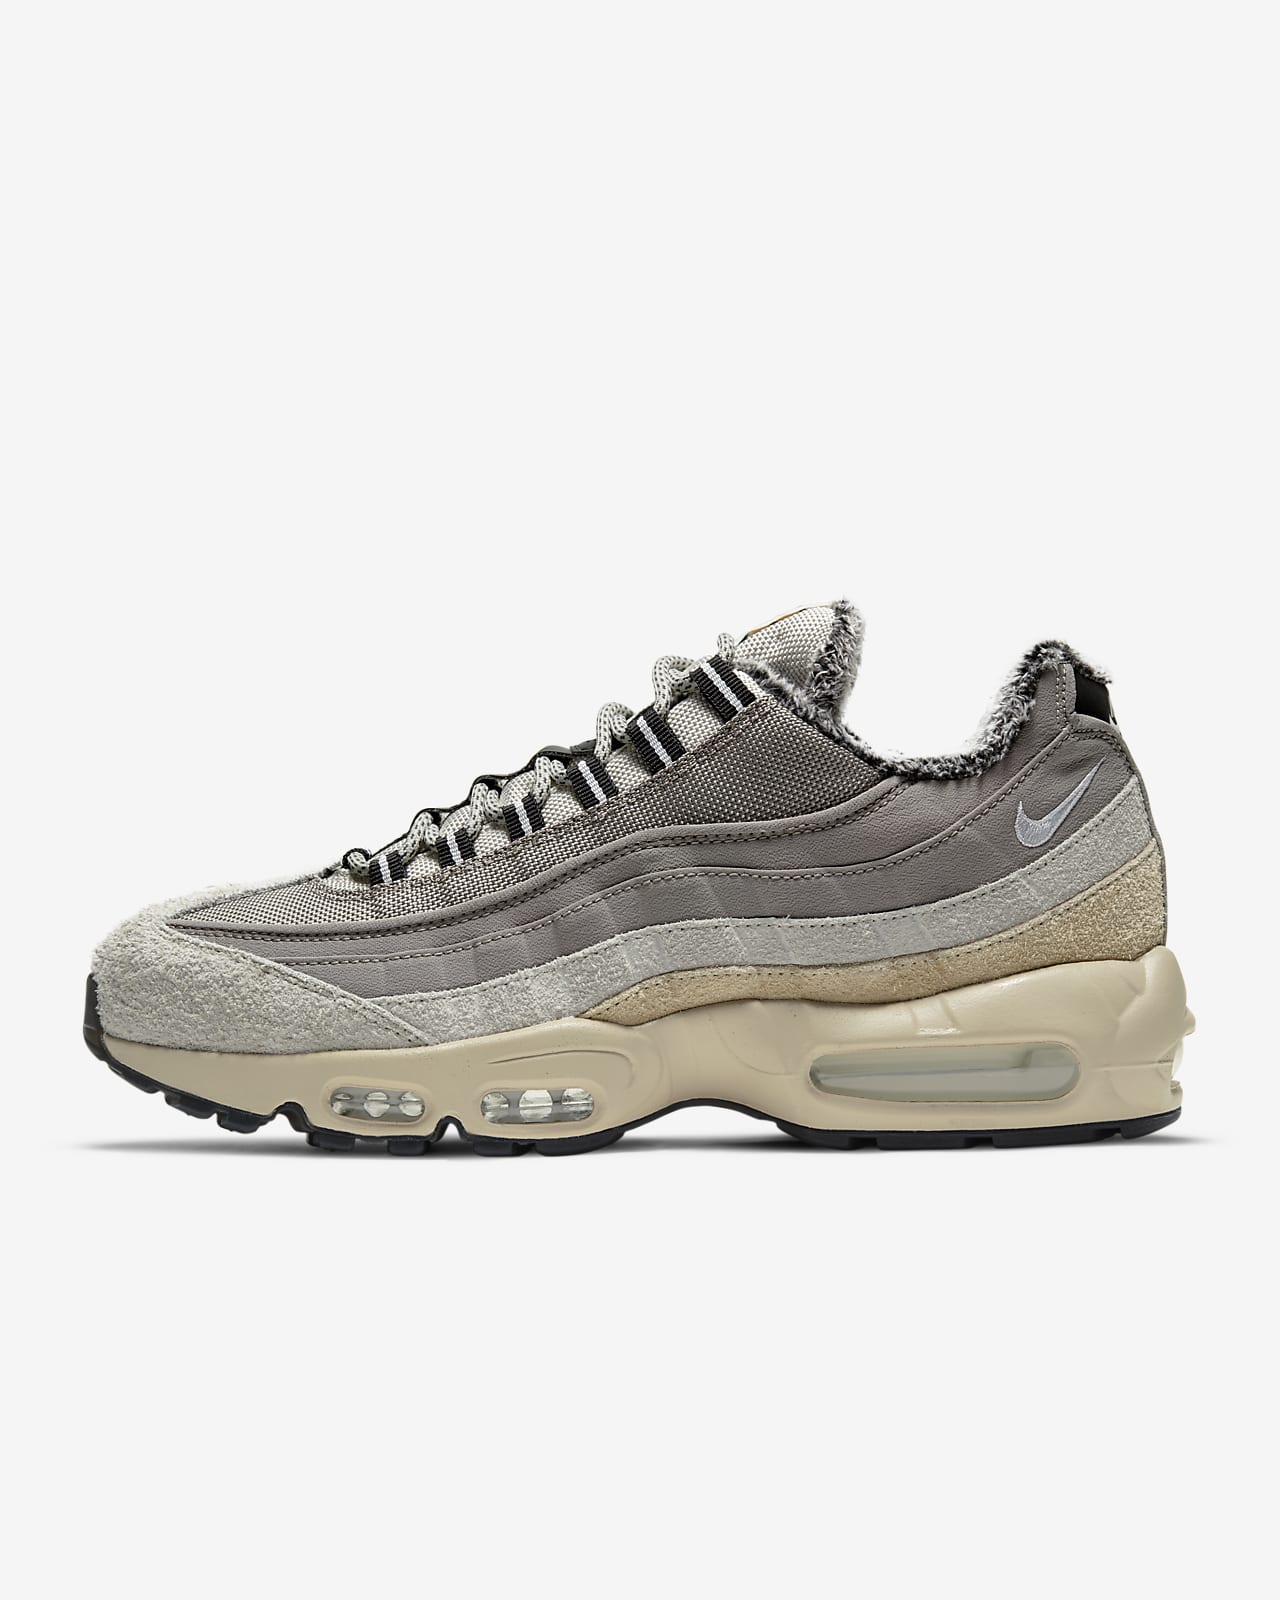 Nike Air Max 95 Special Edition Men's Shoes